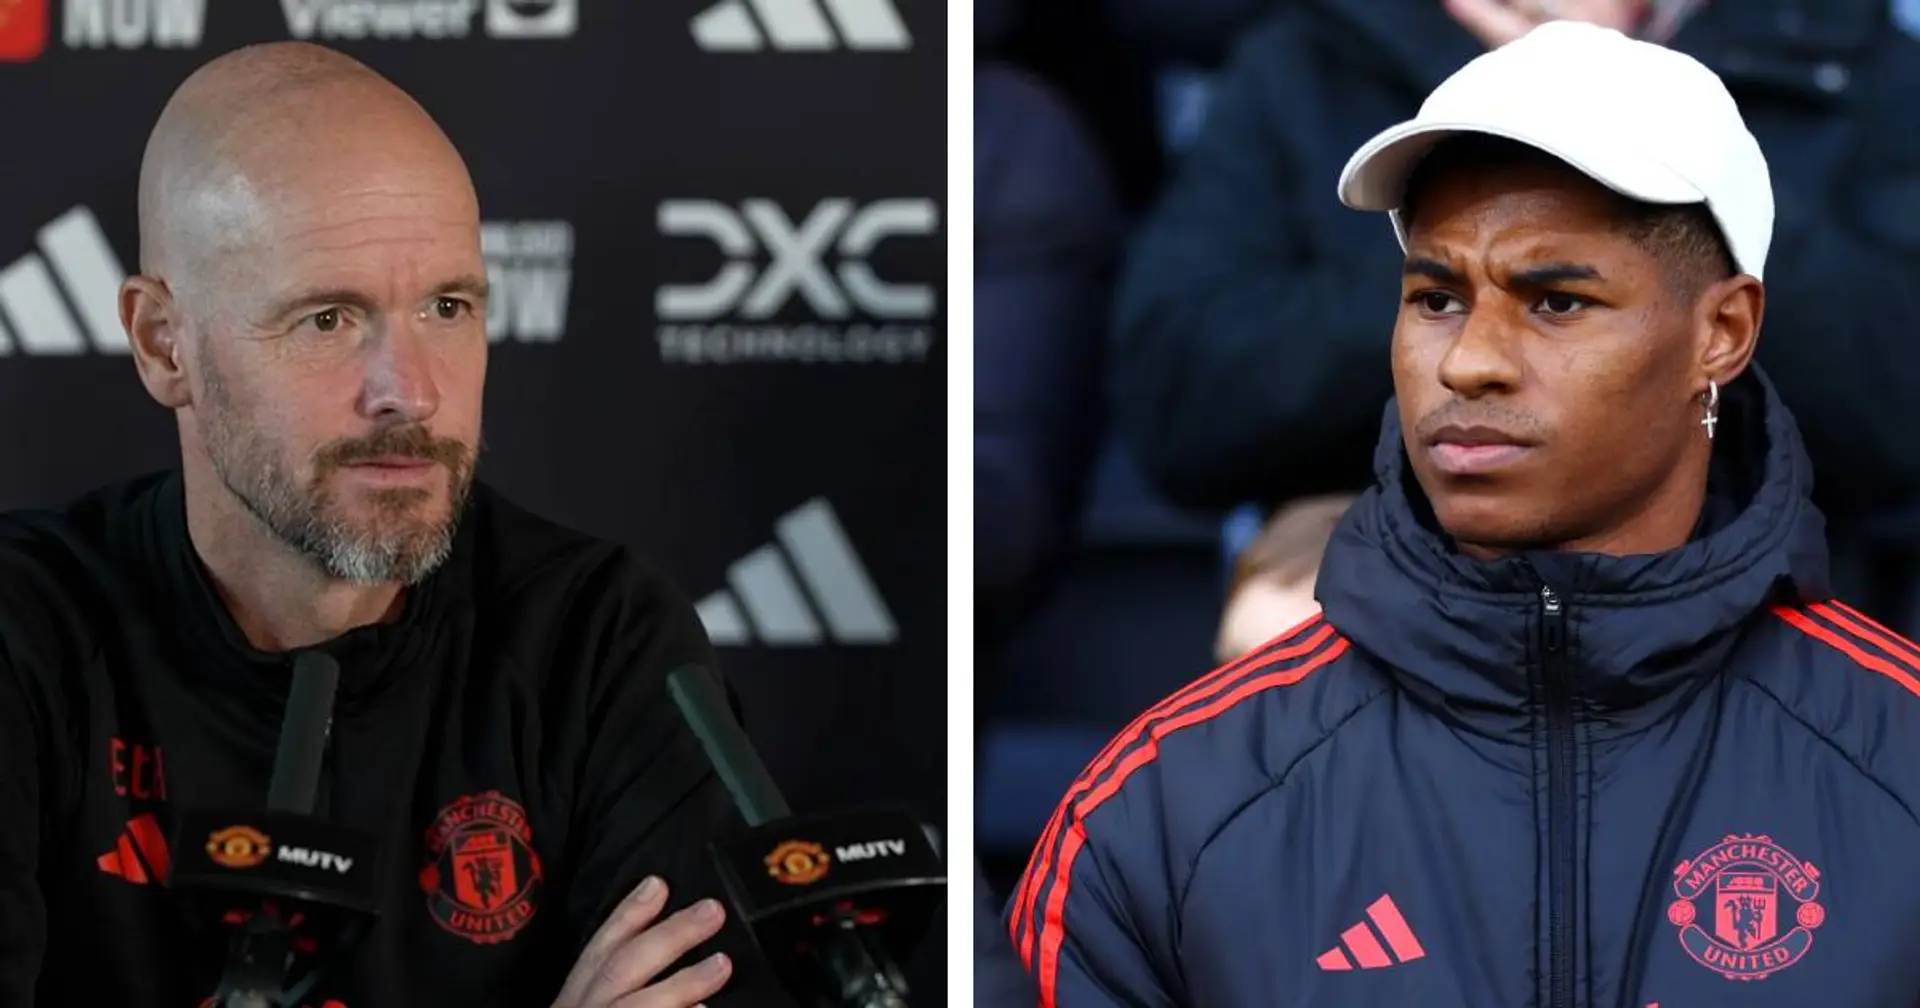 'There is a line': Ten Hag addresses Rashford nightclub controversy for one final time